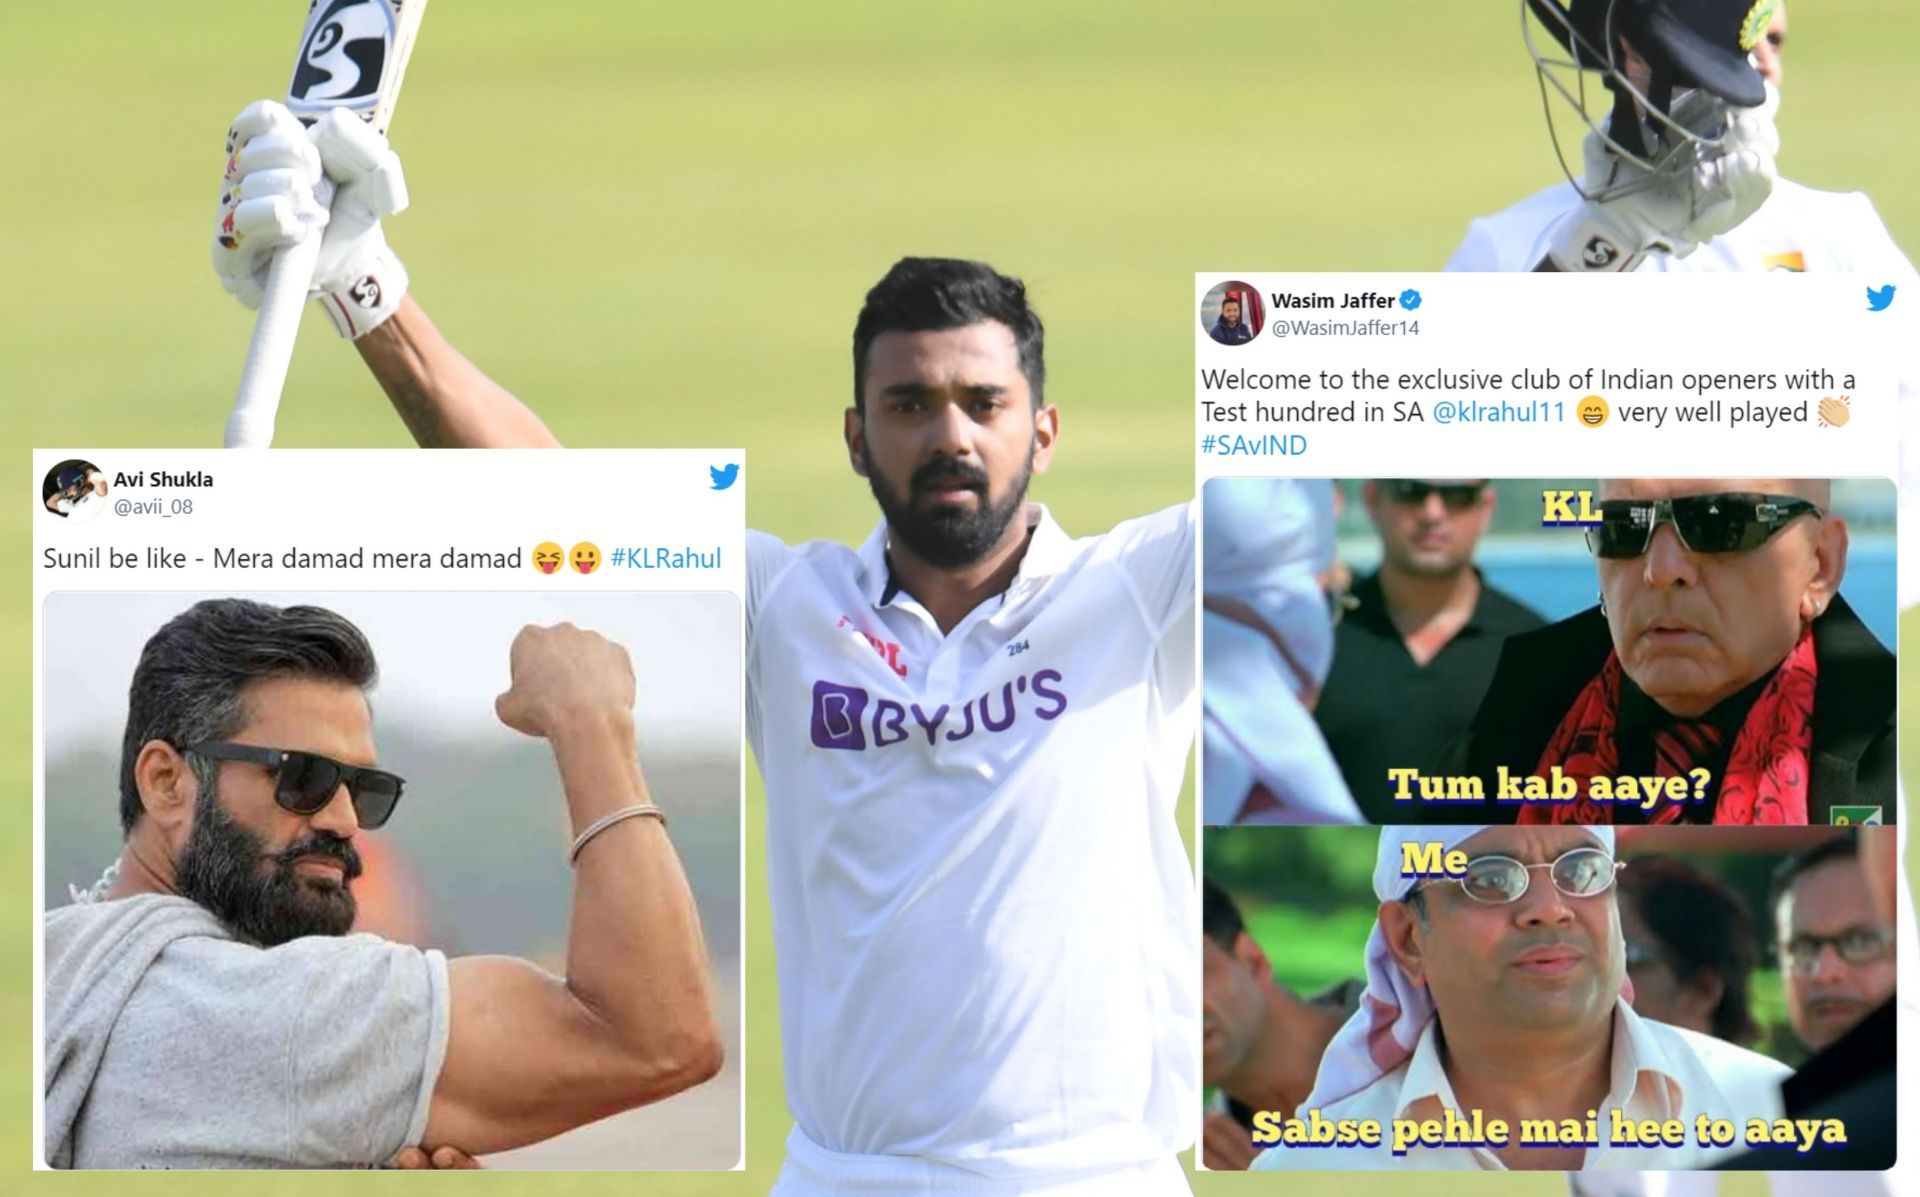 Fans heap praise on KL Rahul after witnessing his scintillating century in the Centurion Test